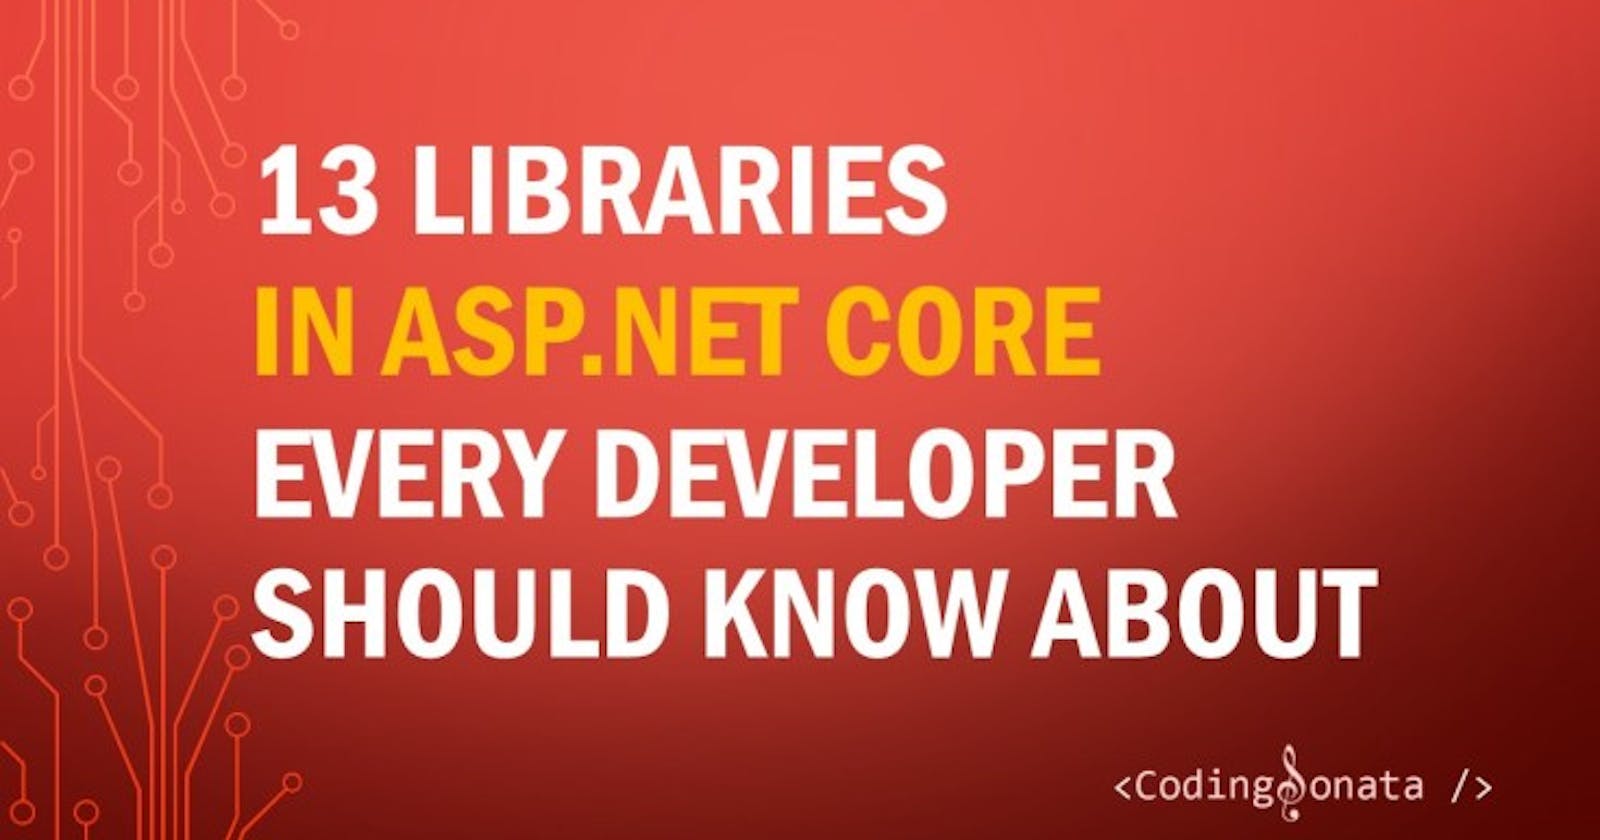 13 Libraries in ASP.NET Core Every Developer Should Know About